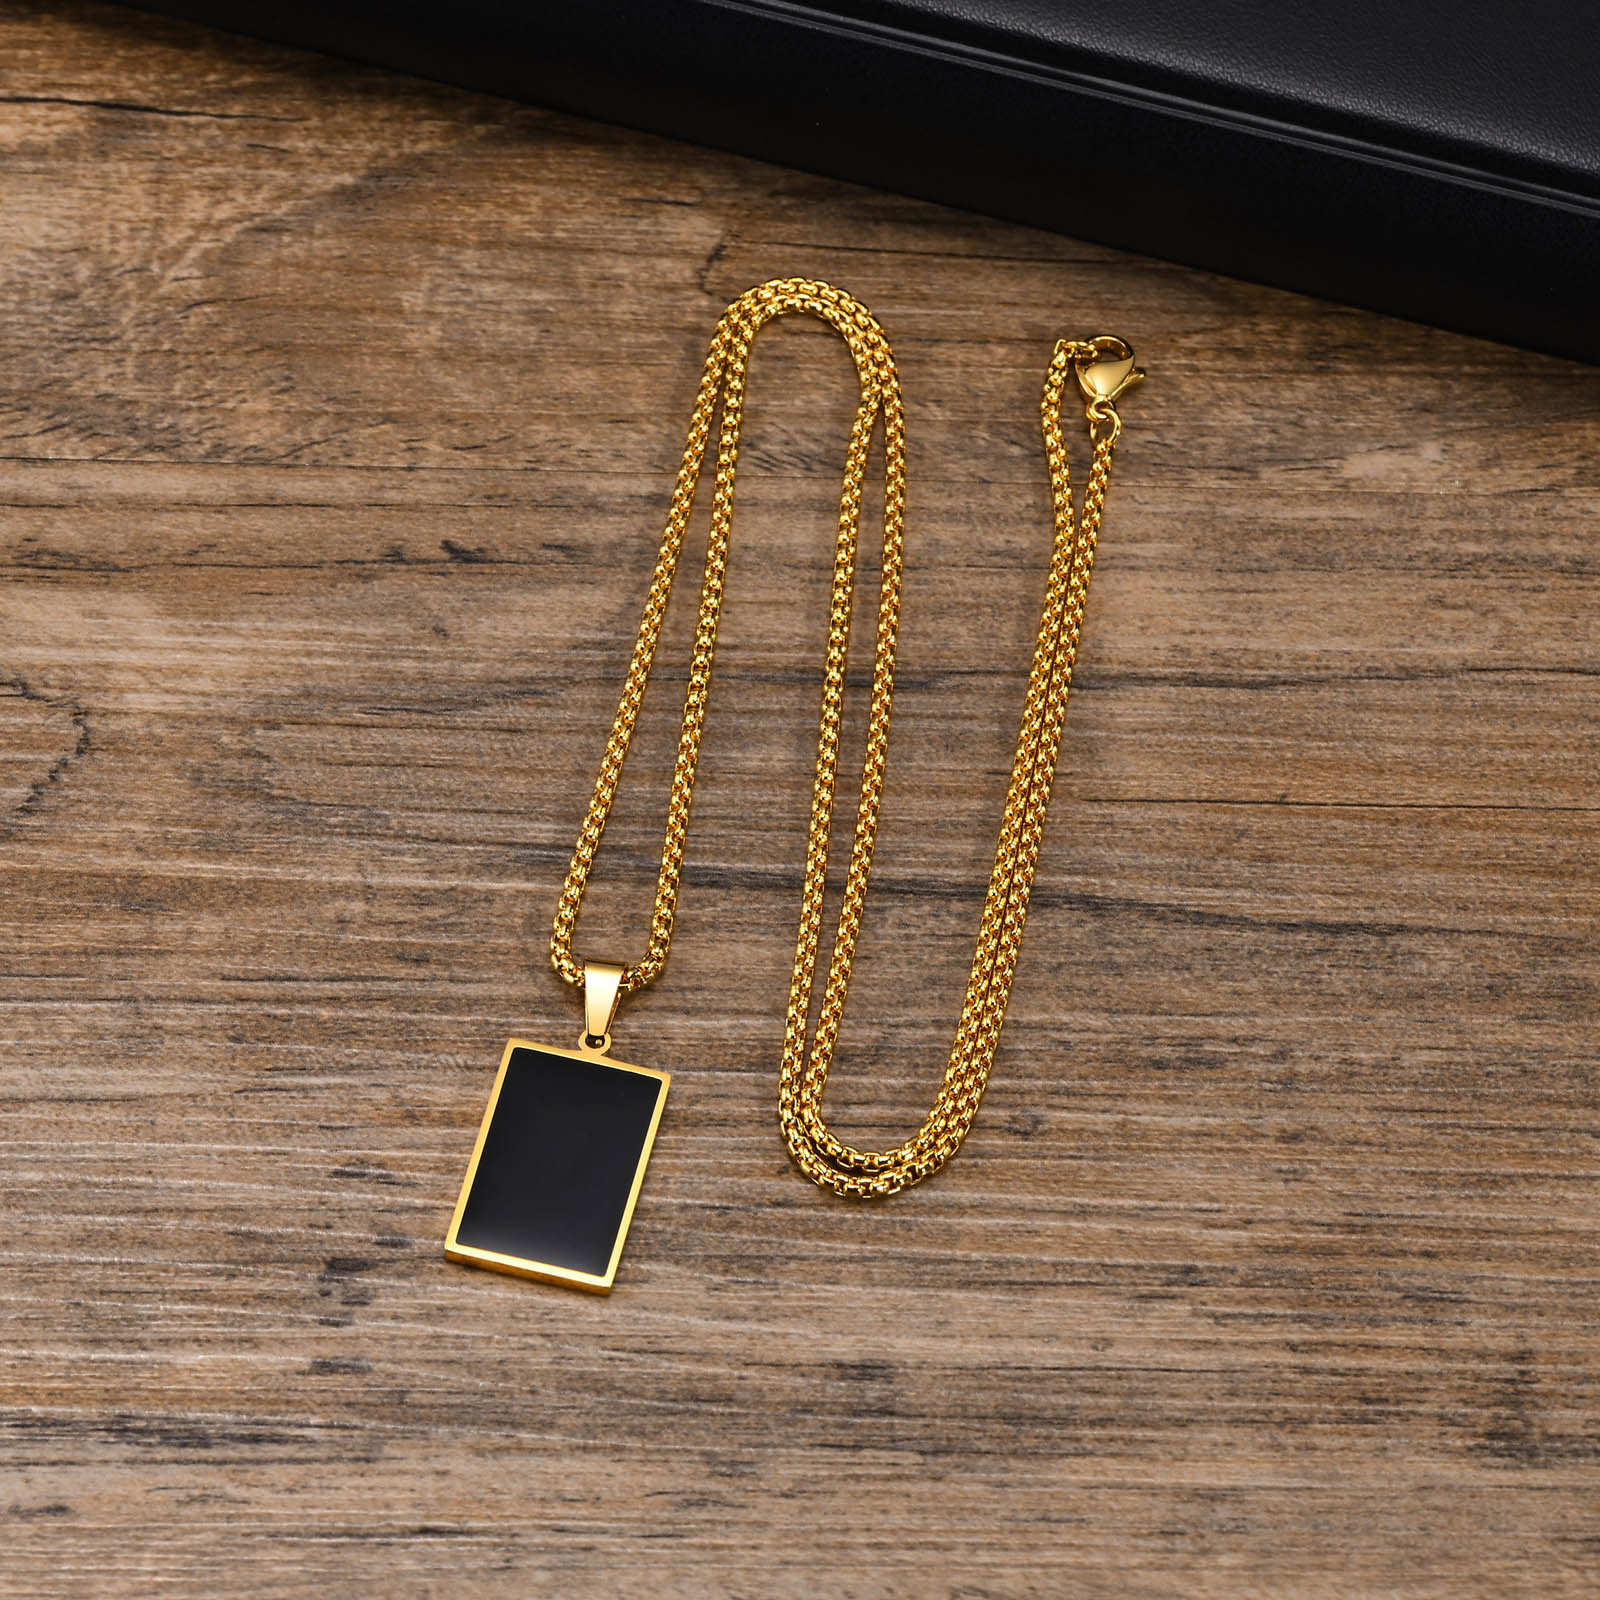 4:Gold pendant and 60CM chain